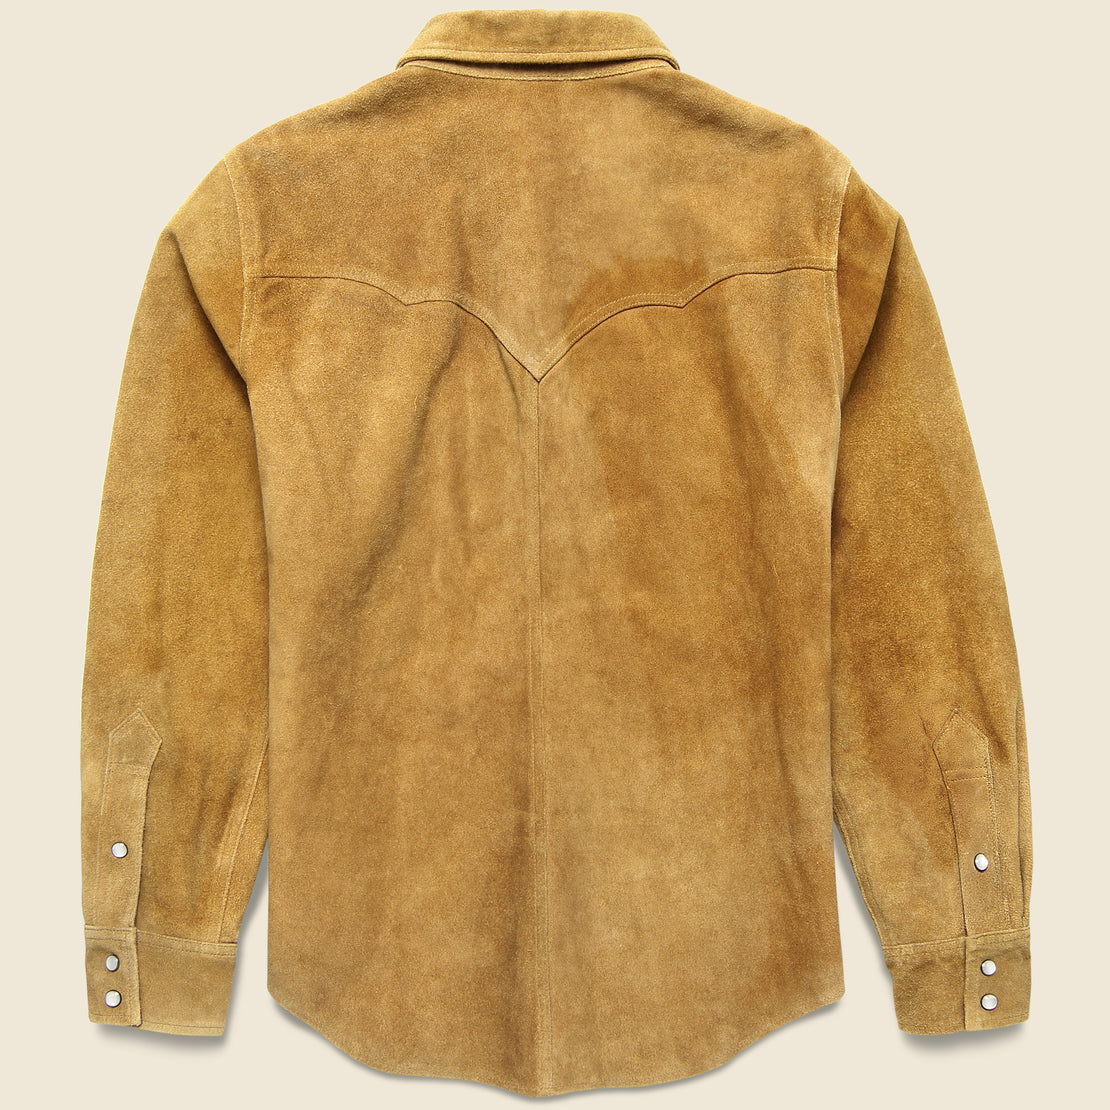 Lulworth Jacket - Tan Suede - RRL - STAG Provisions - Outerwear - Shirt Jacket